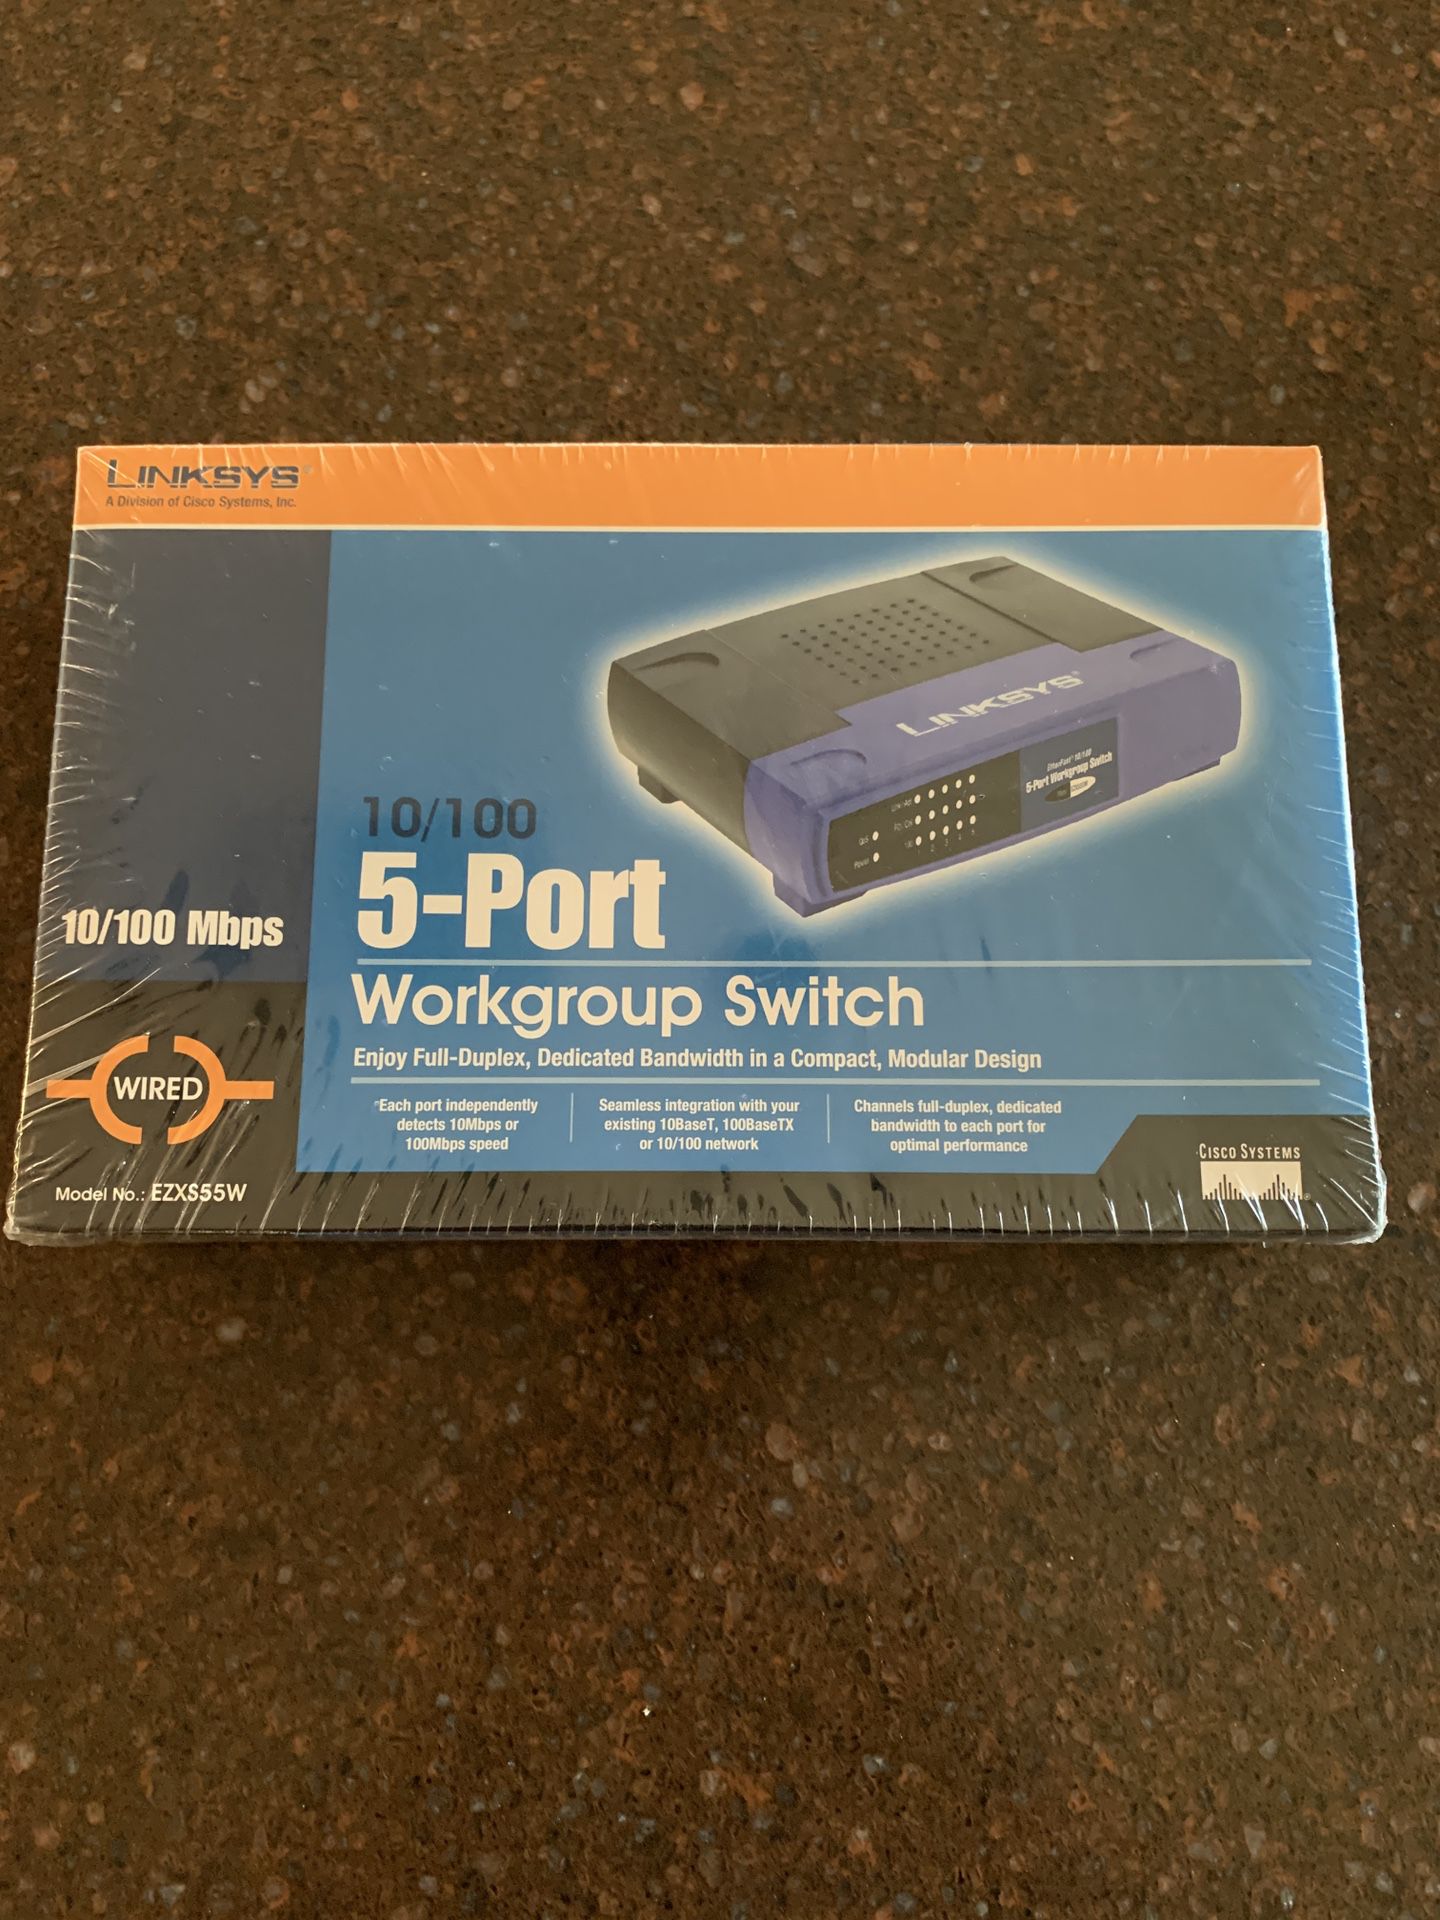 Linksys 5-Port Workgroup Switch 10/100 Mbps